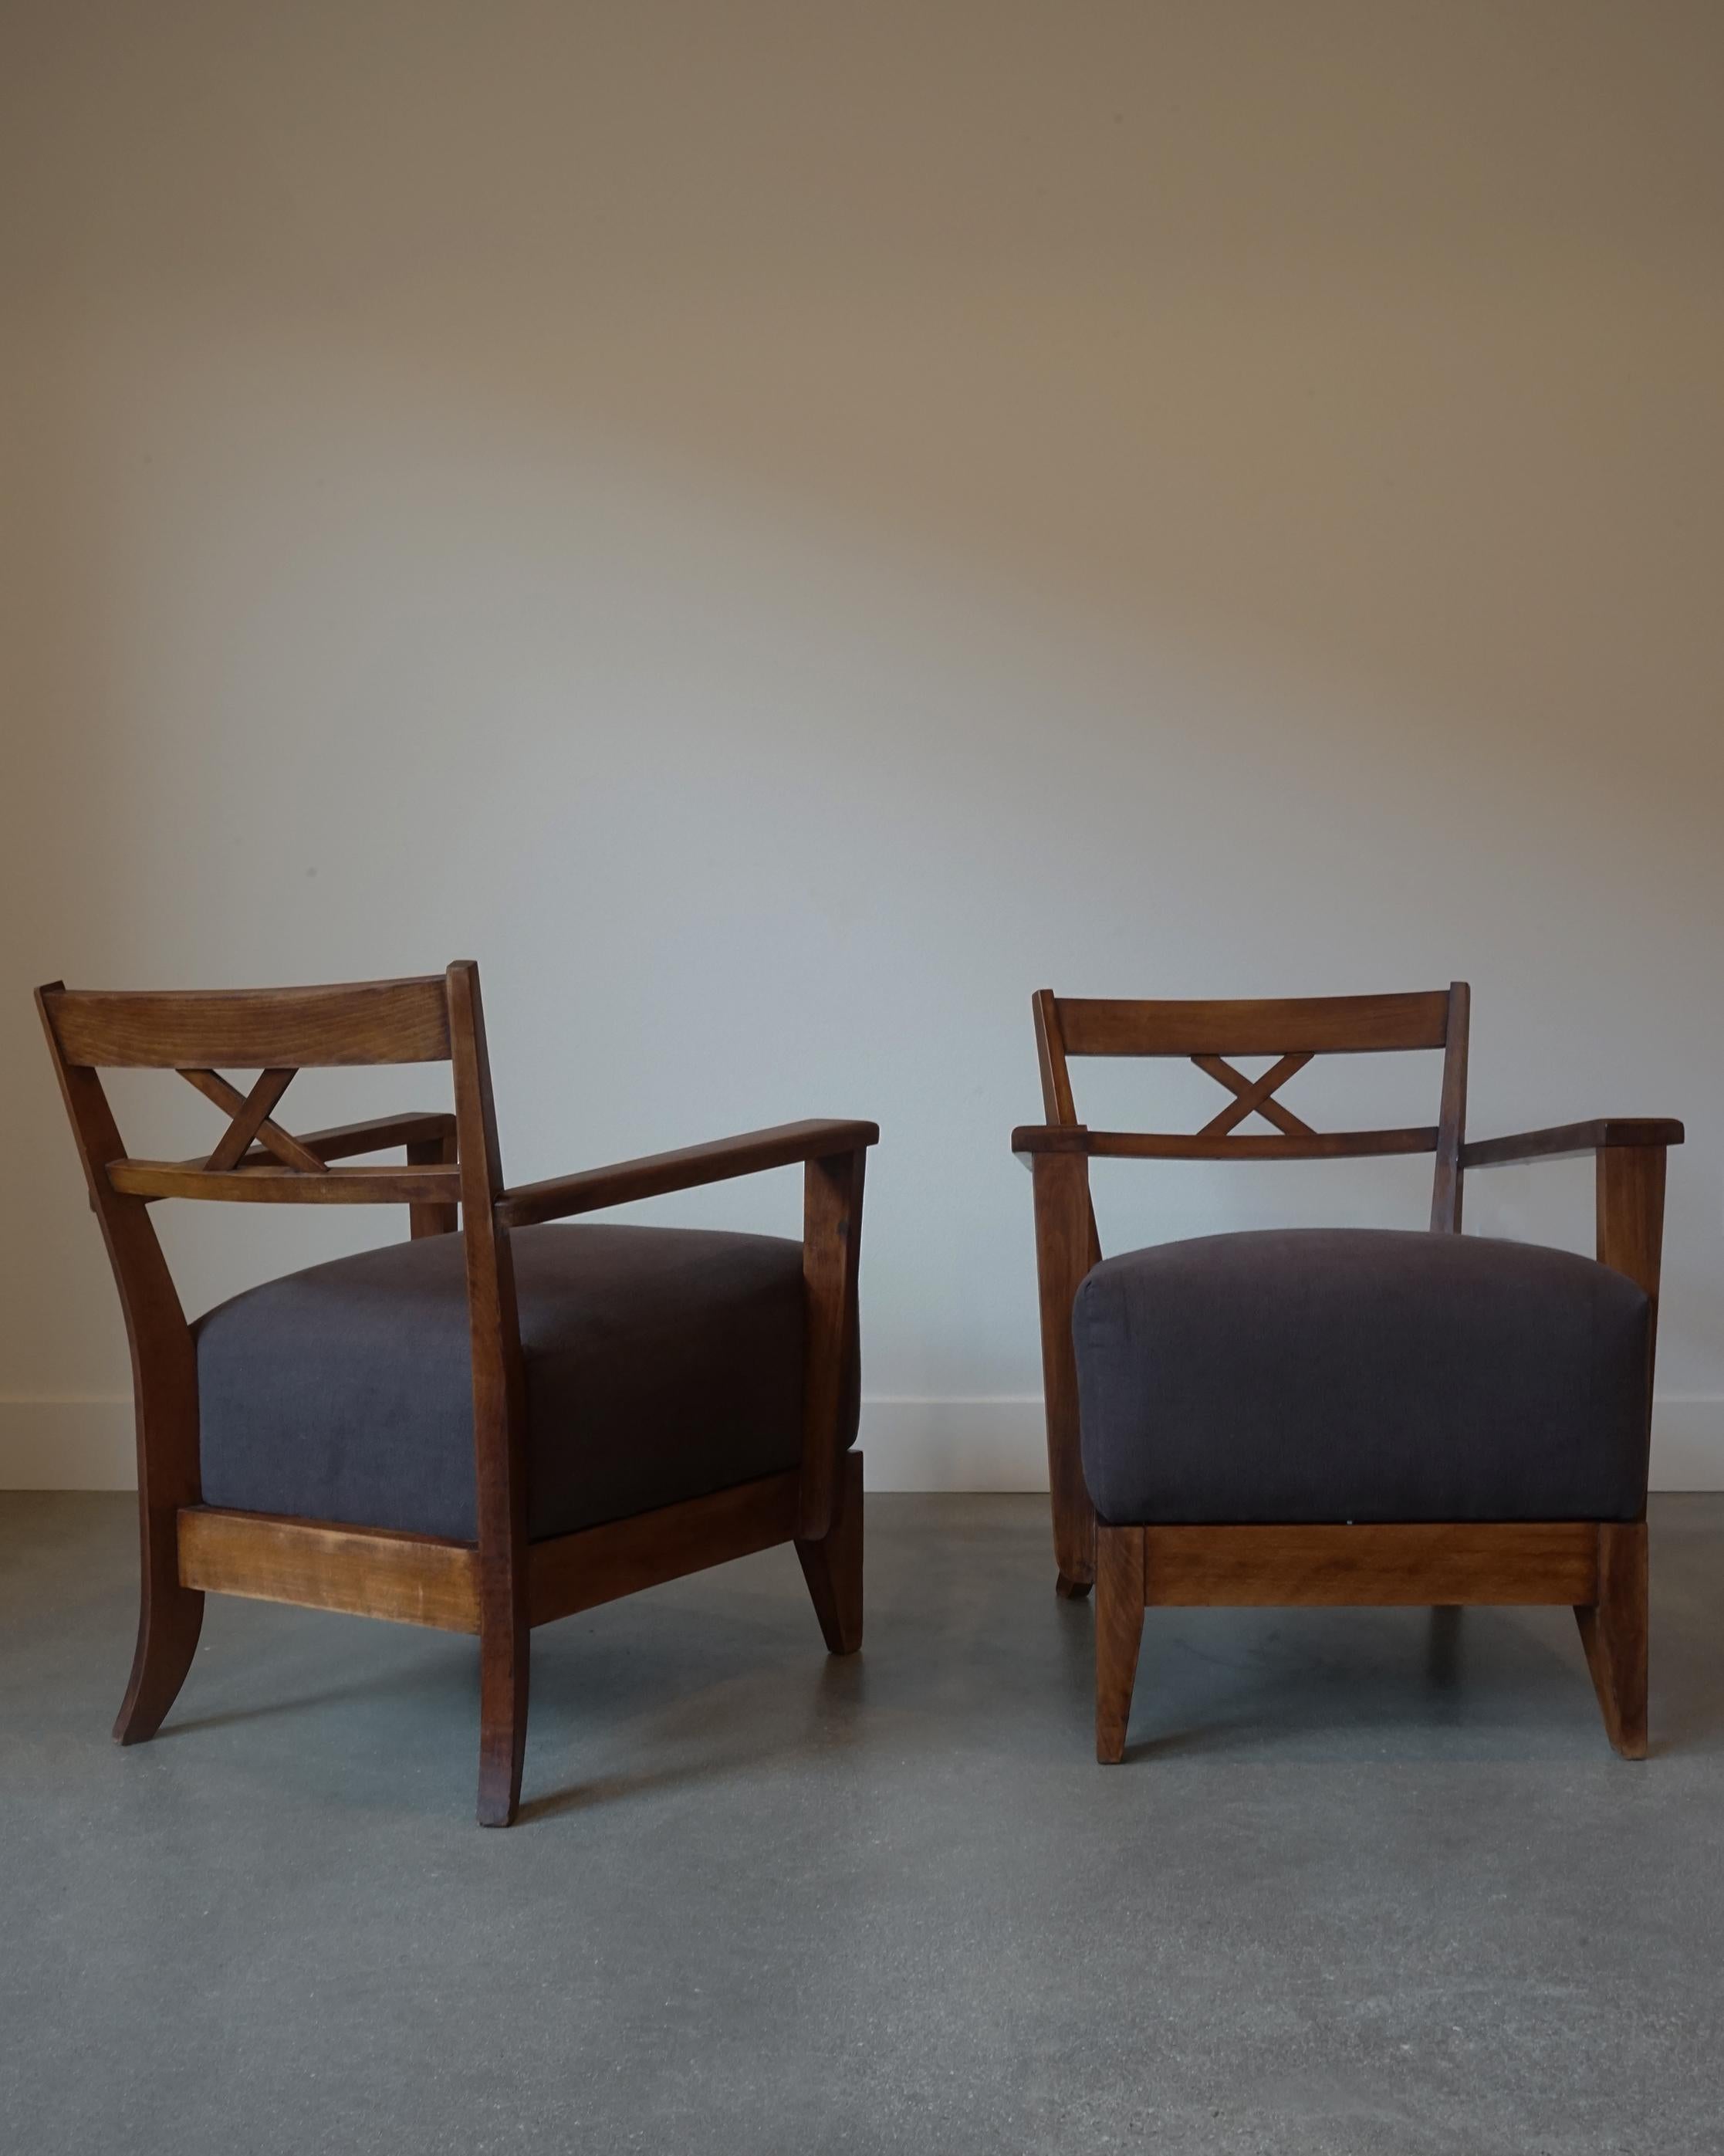 Vintage French Modernist Oak Lounge Chairs, 1940's, Belgian Linen Upholstery, 2 For Sale 1